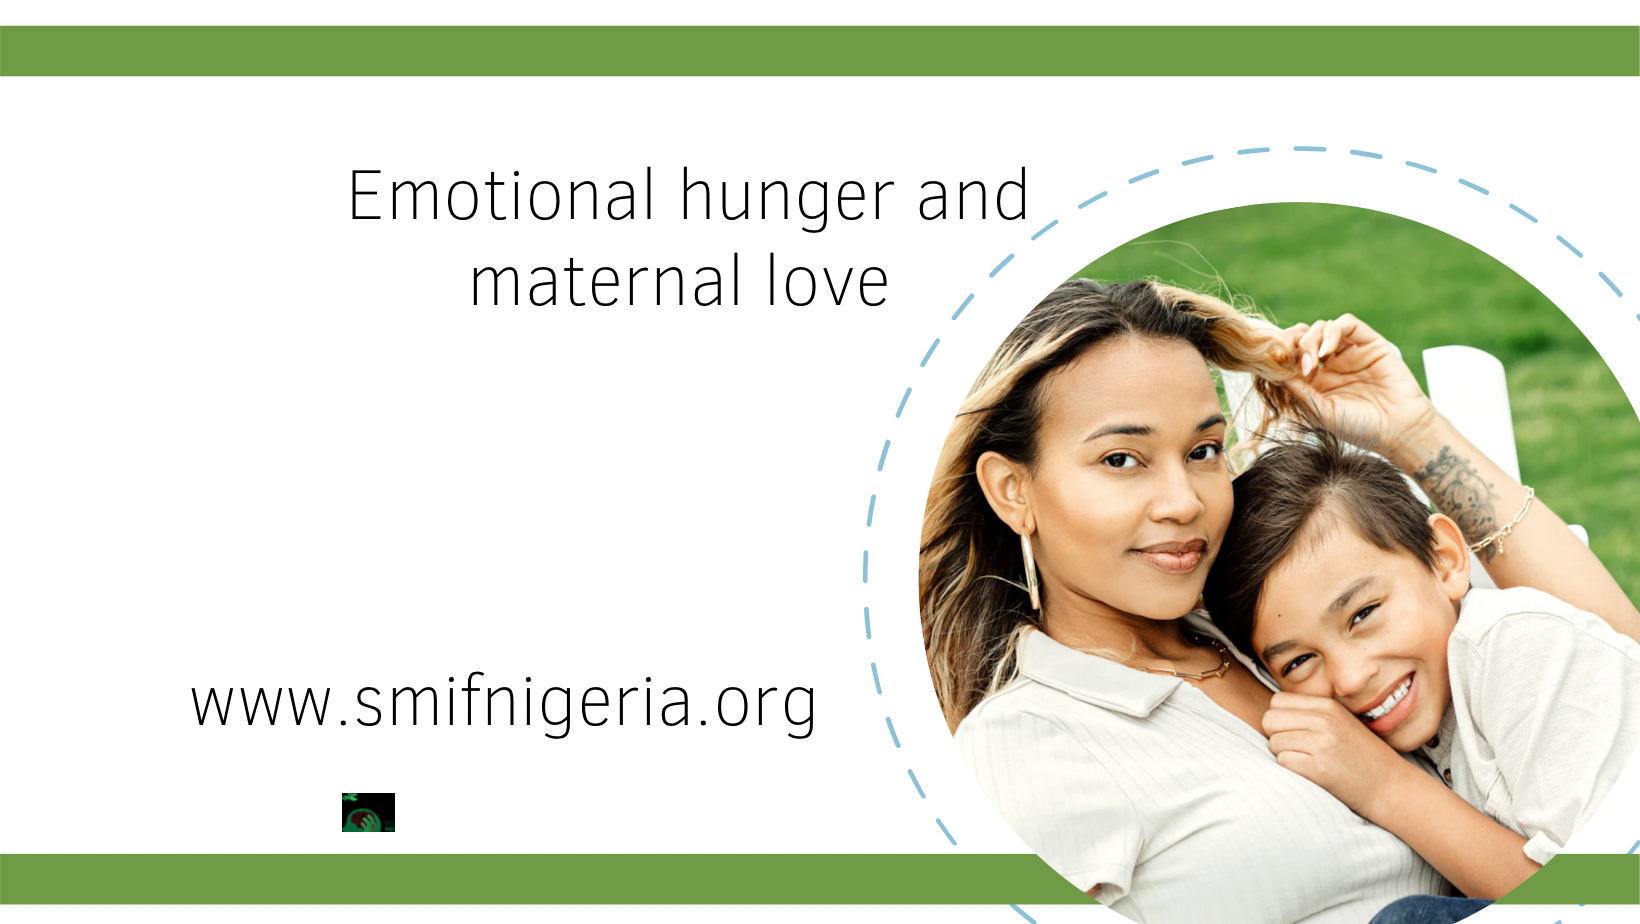 Predicting The Connection Between Emotional Hunger and Maternal Love